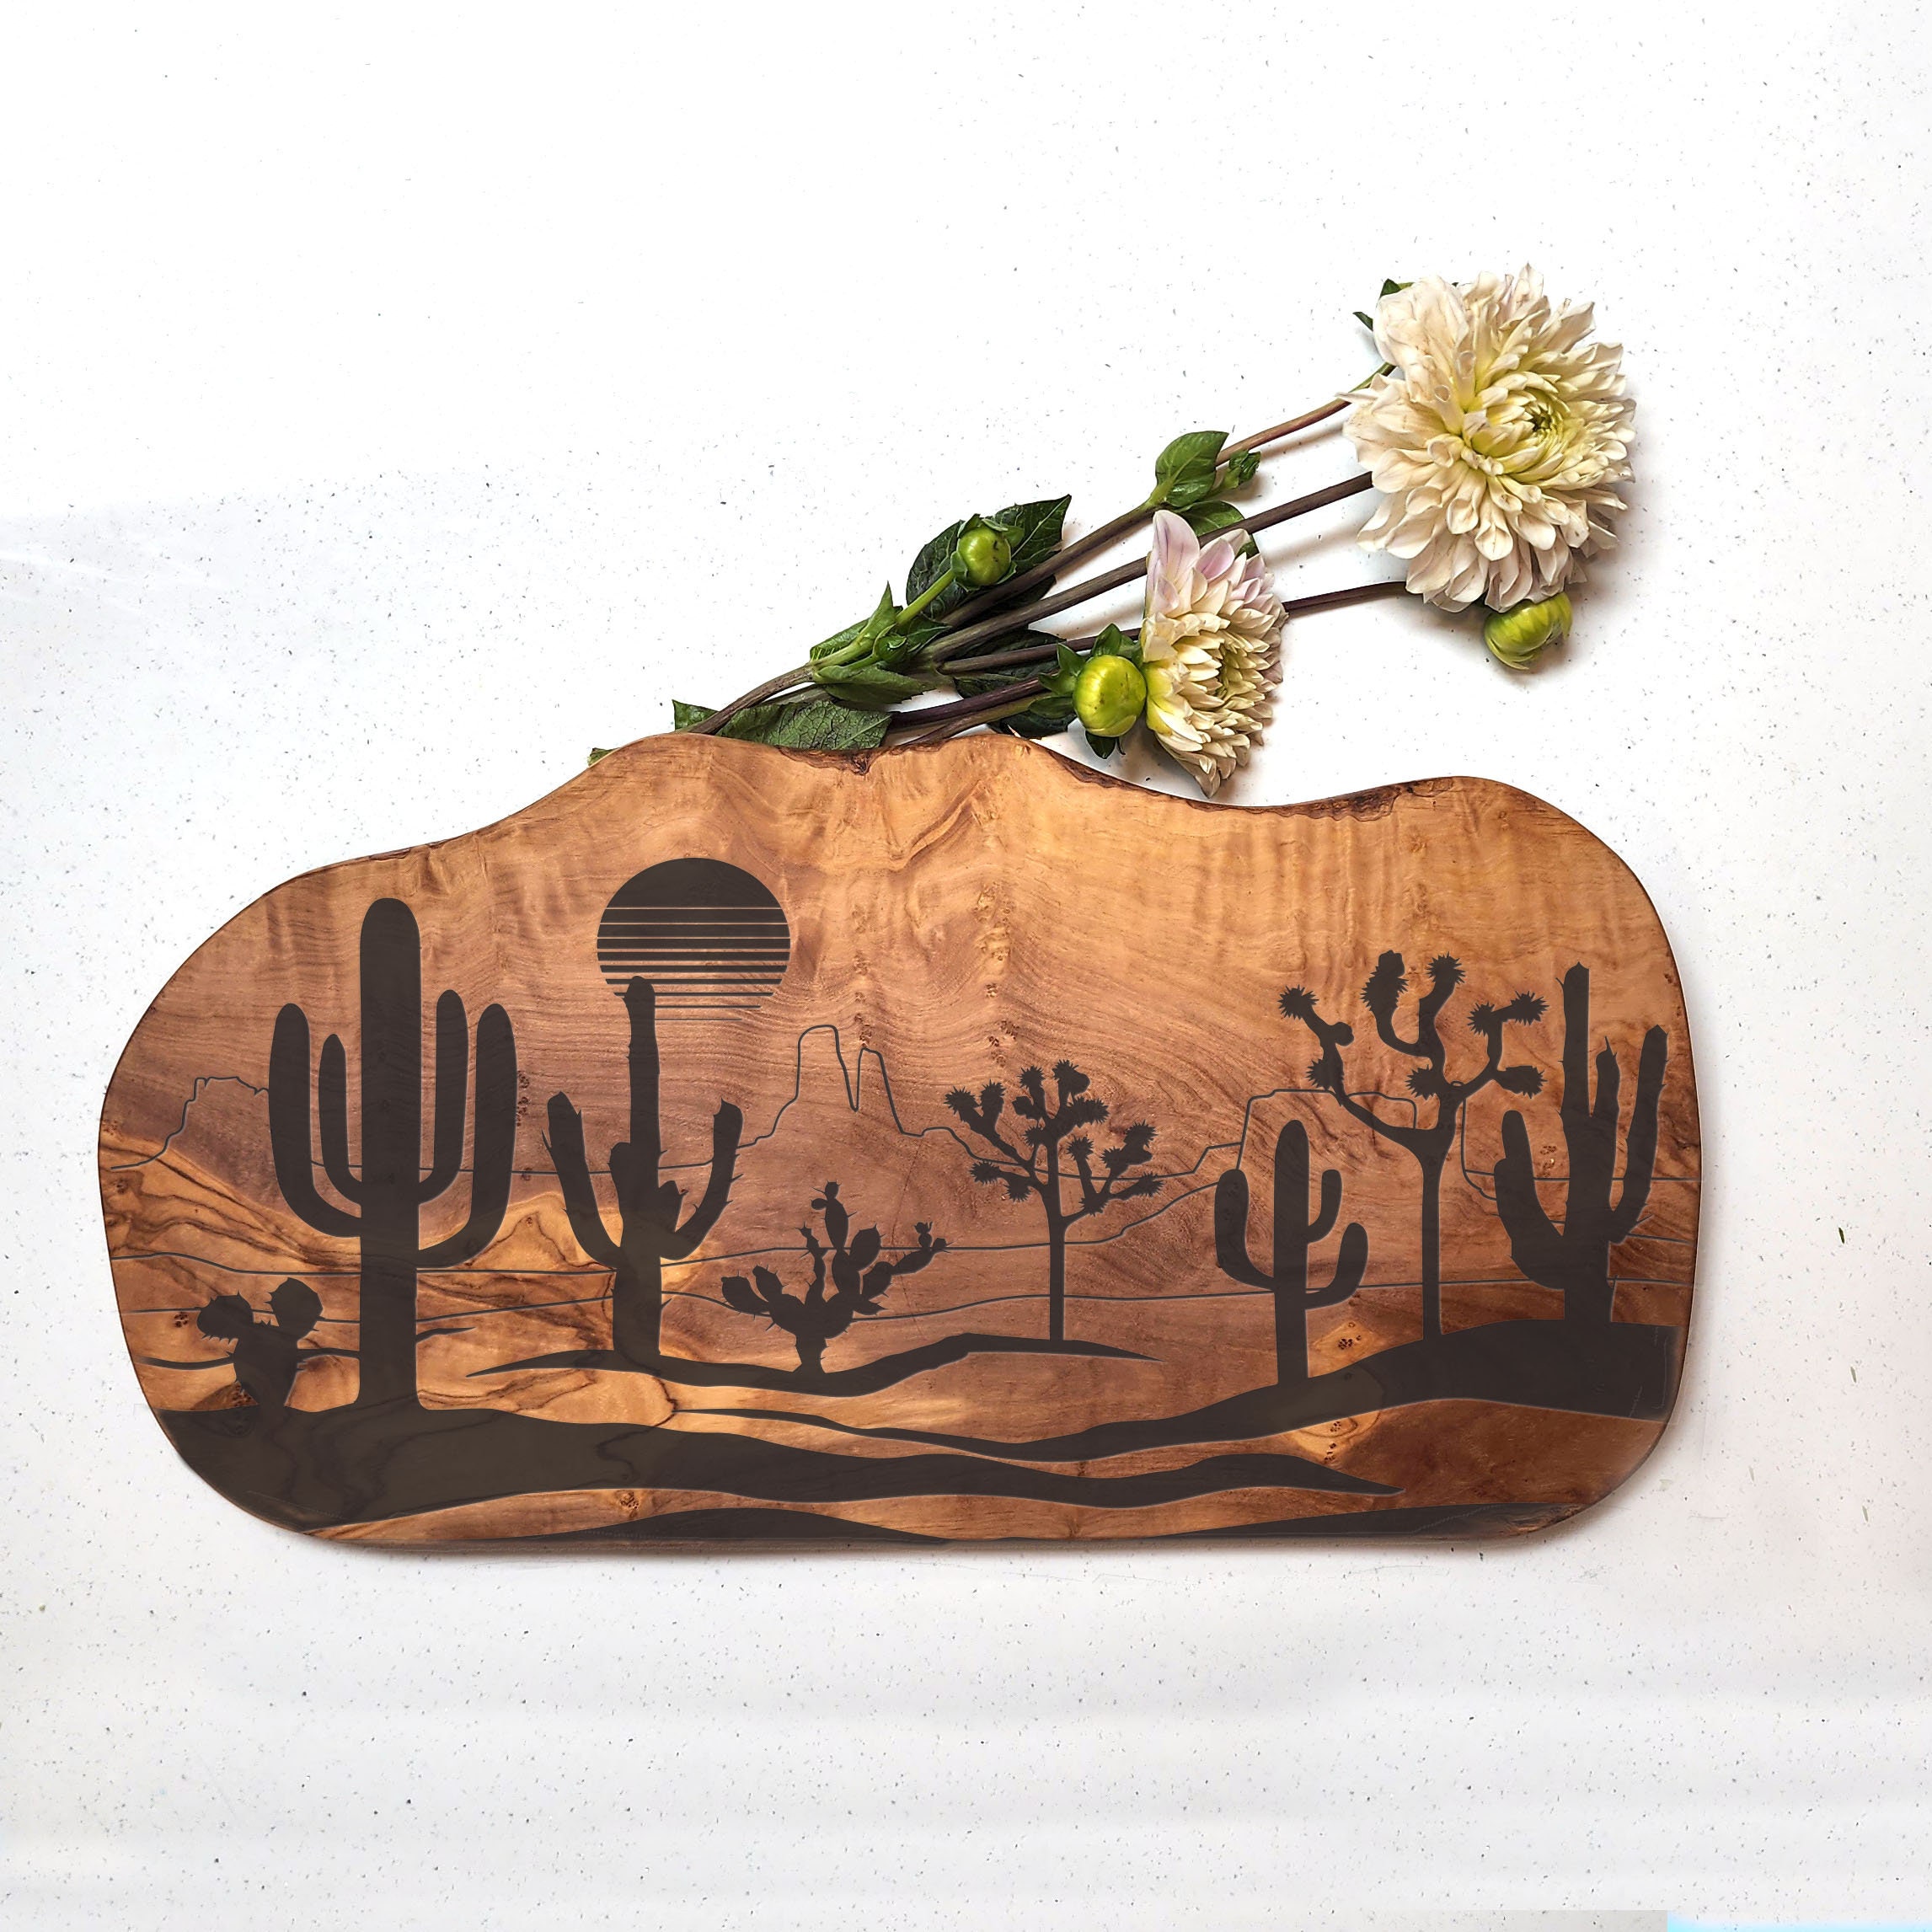 Custom Wood Burning Patterns: Cactus // Easy Pattern Template Design //  Pyrography Art // Instant Download PDF File // Cutting Board Gift 